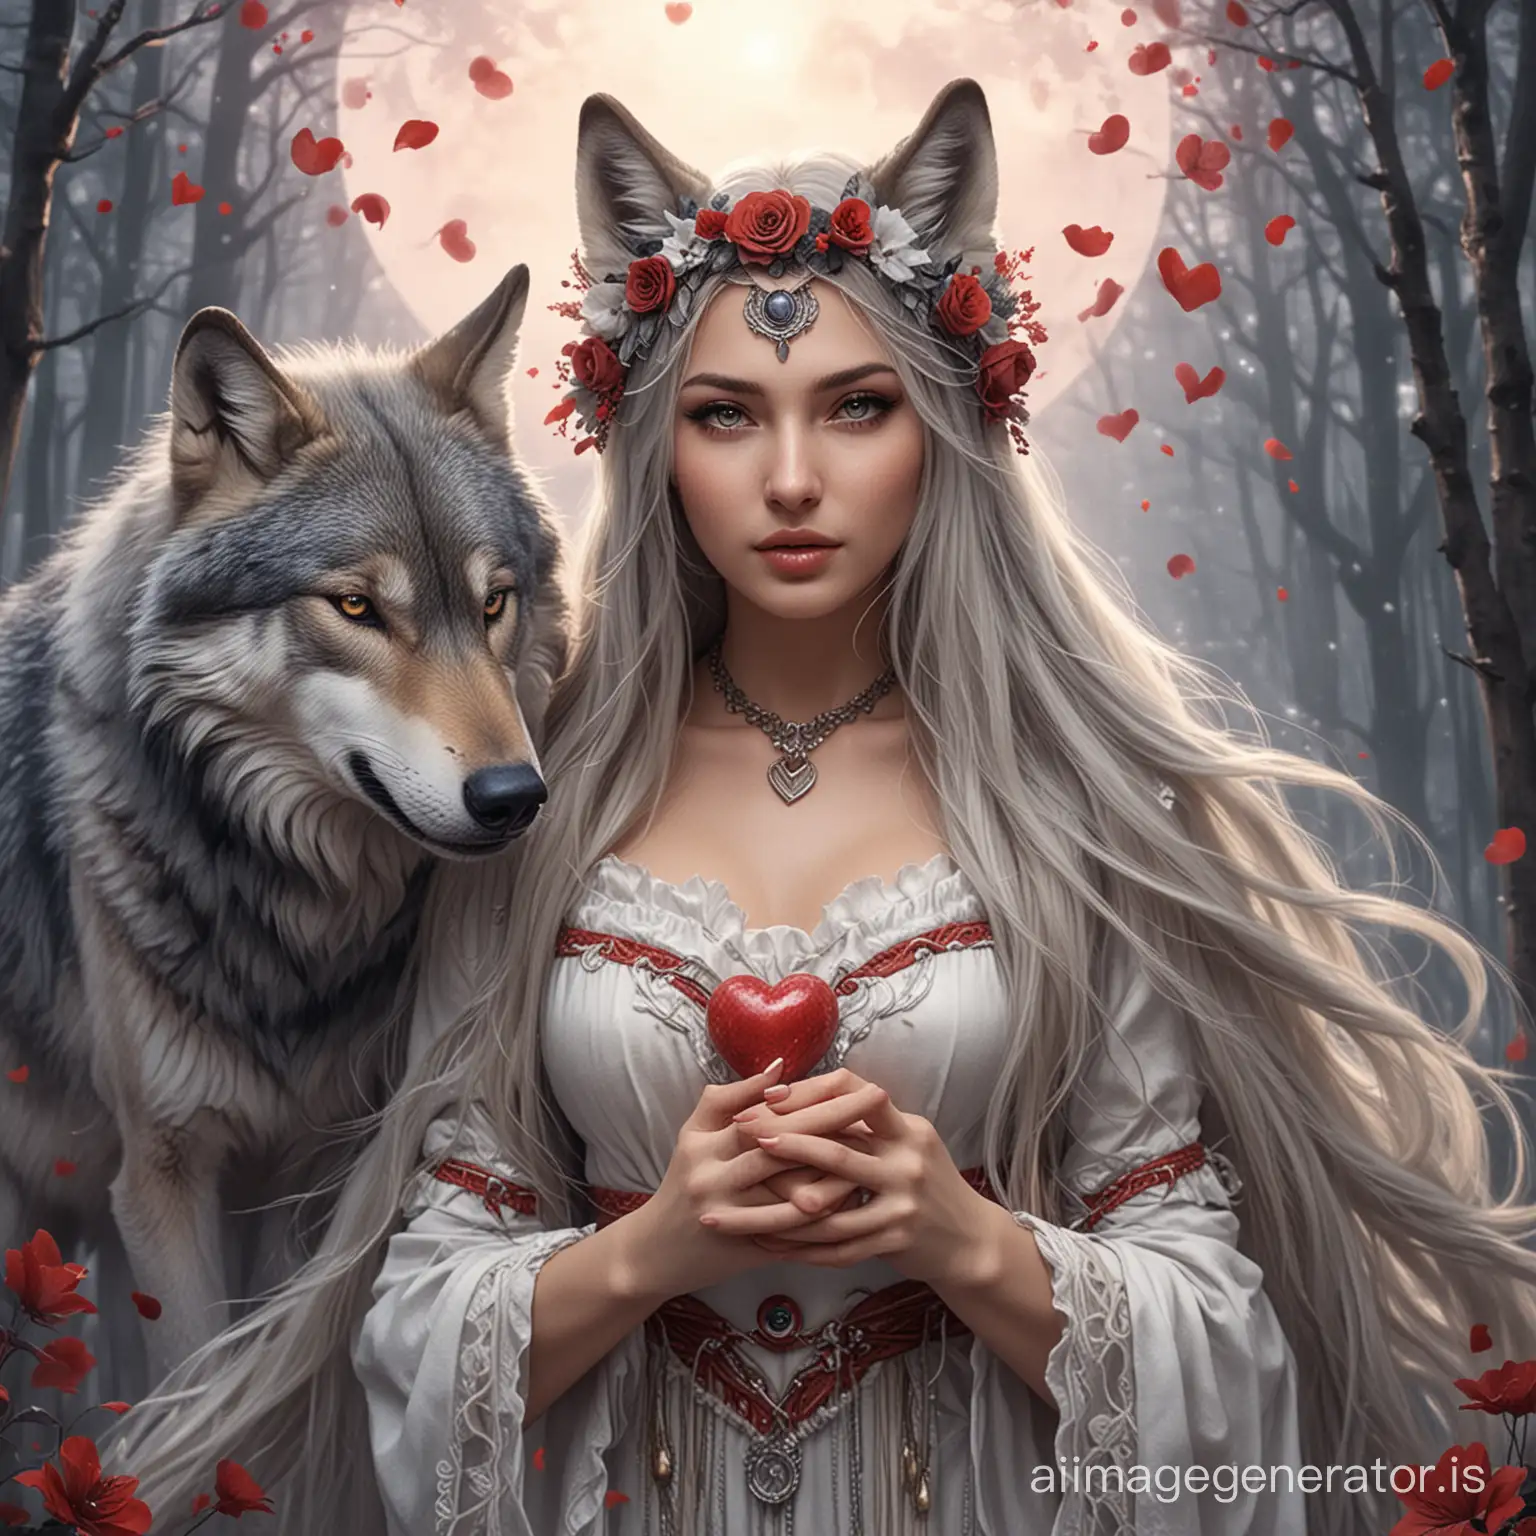 Enchanted-Wolf-Maiden-Captivated-by-Loves-Spell